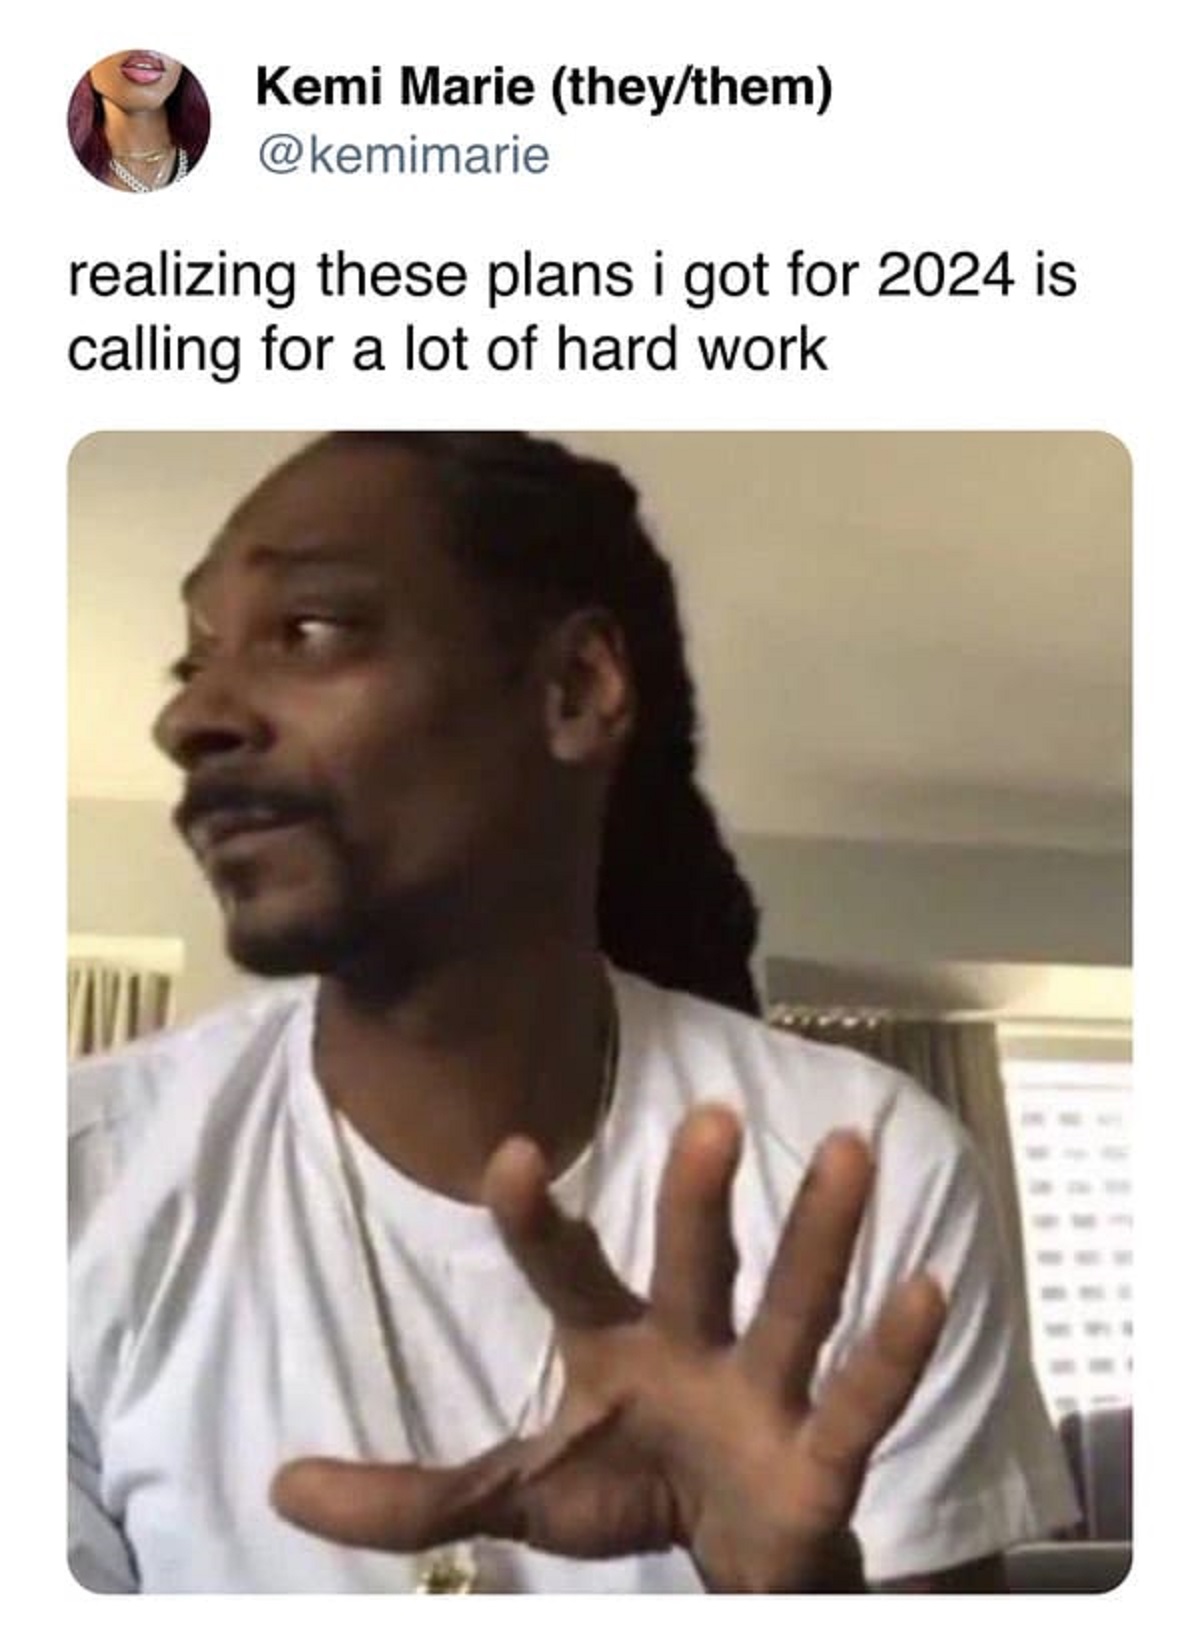 photo caption - Kemi Marie theythem realizing these plans i got for 2024 is calling for a lot of hard work